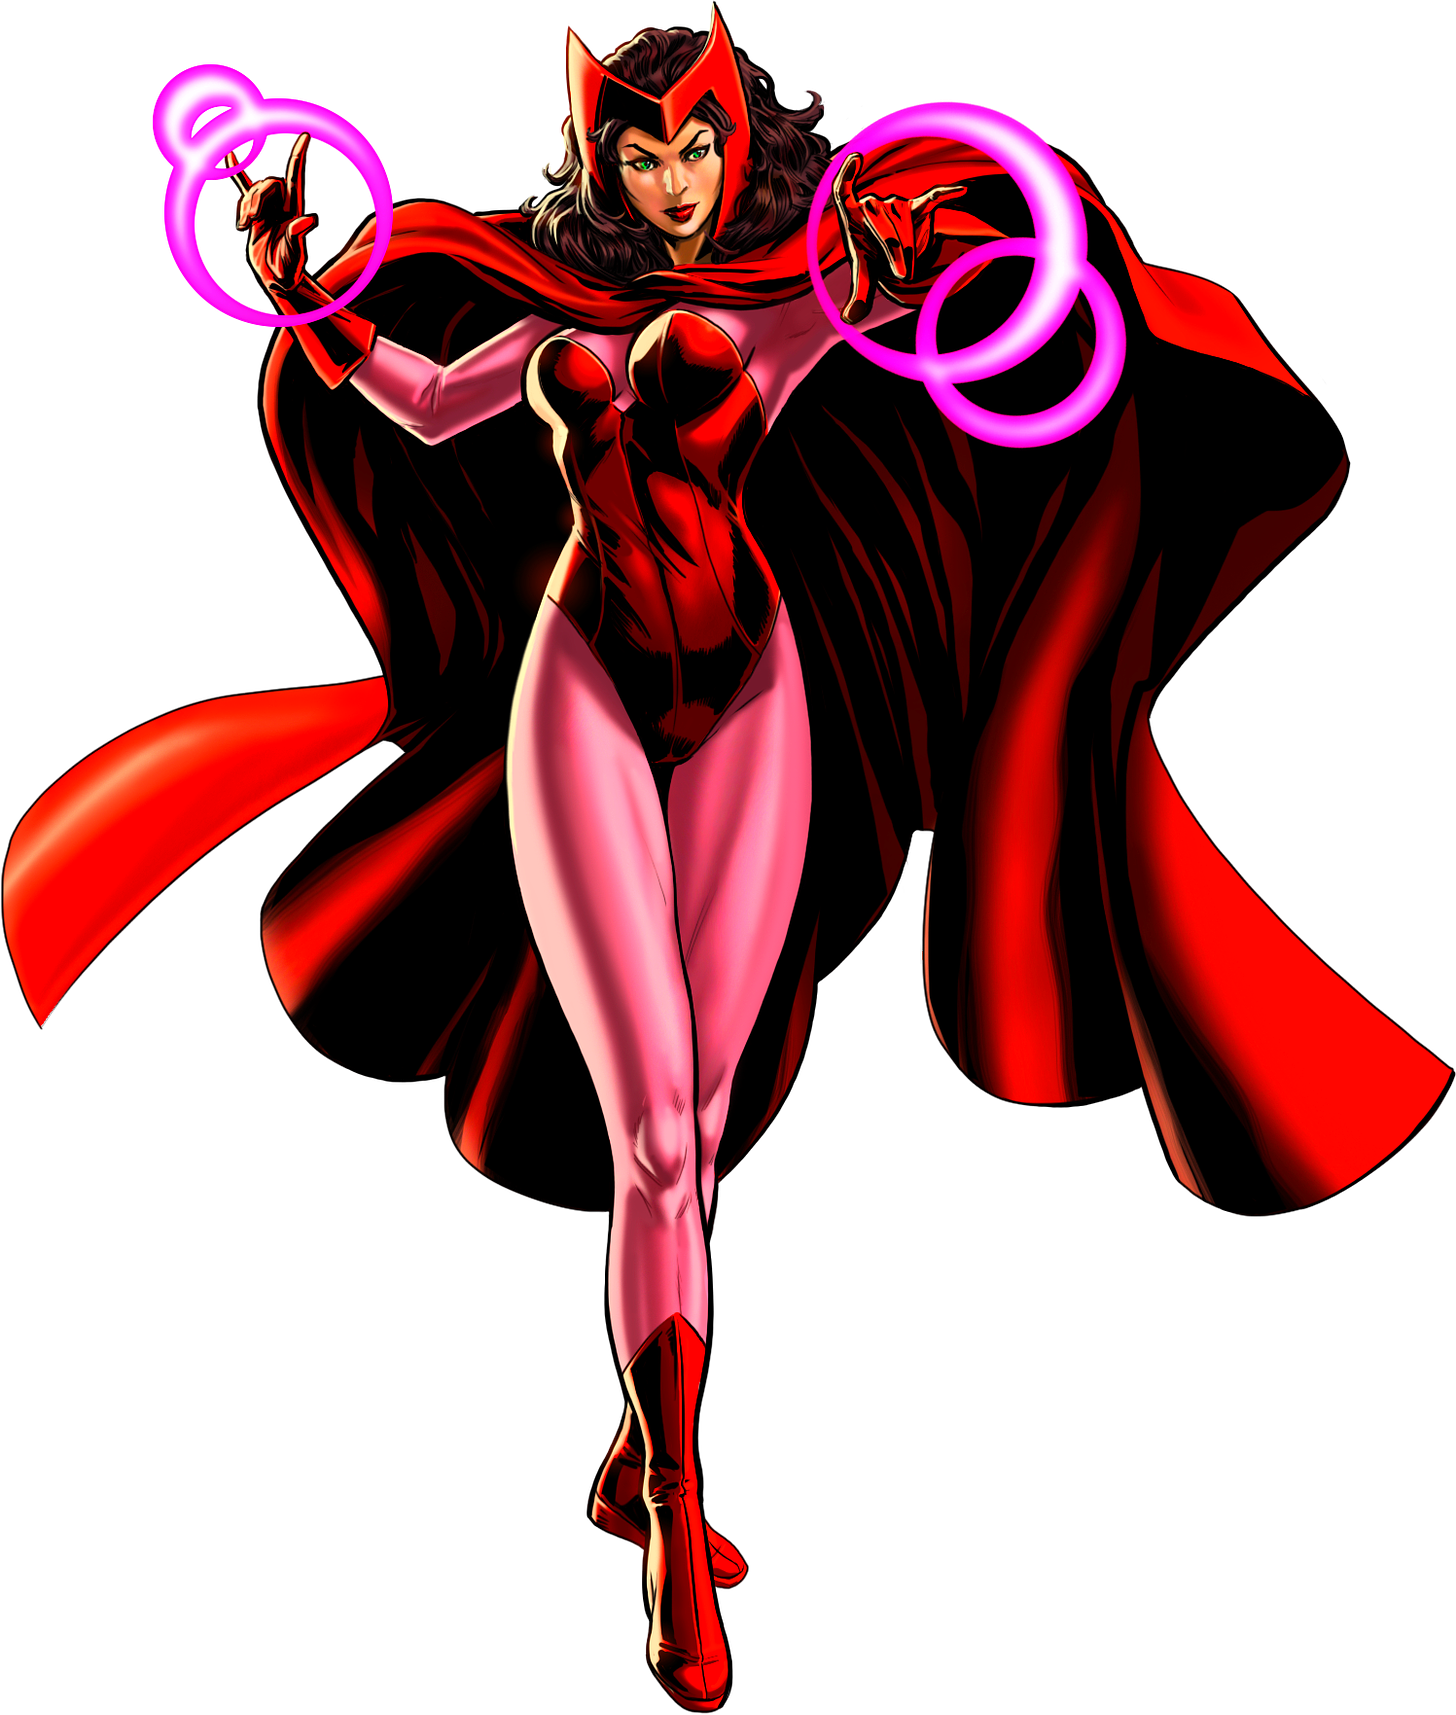 https://www.freepngimg.com/thumb/scarlet_witch/21515-2-scarlet-witch-transparent-background.png